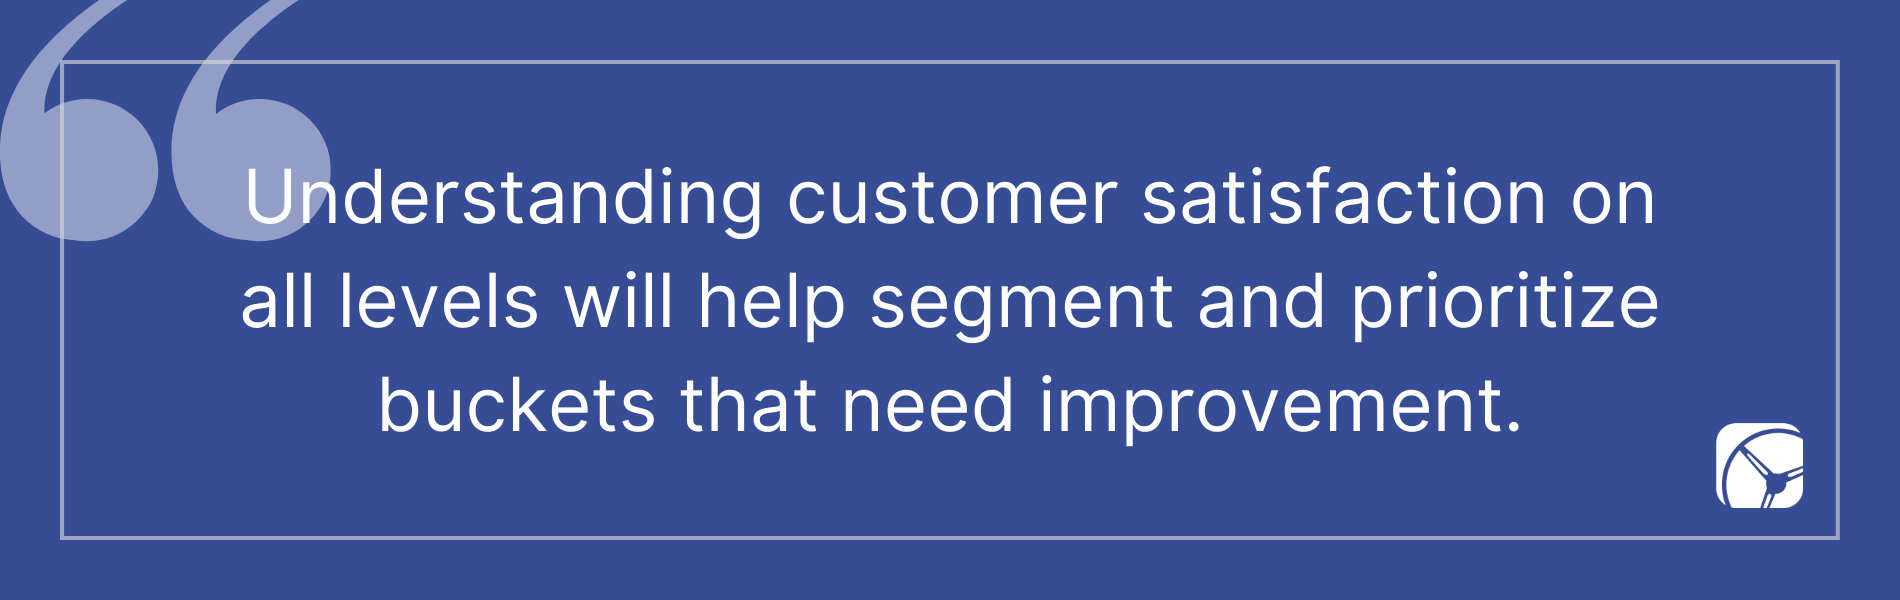 Understanding customer satisfaction on all levels will help segment and prioritize buckets that need improvement.